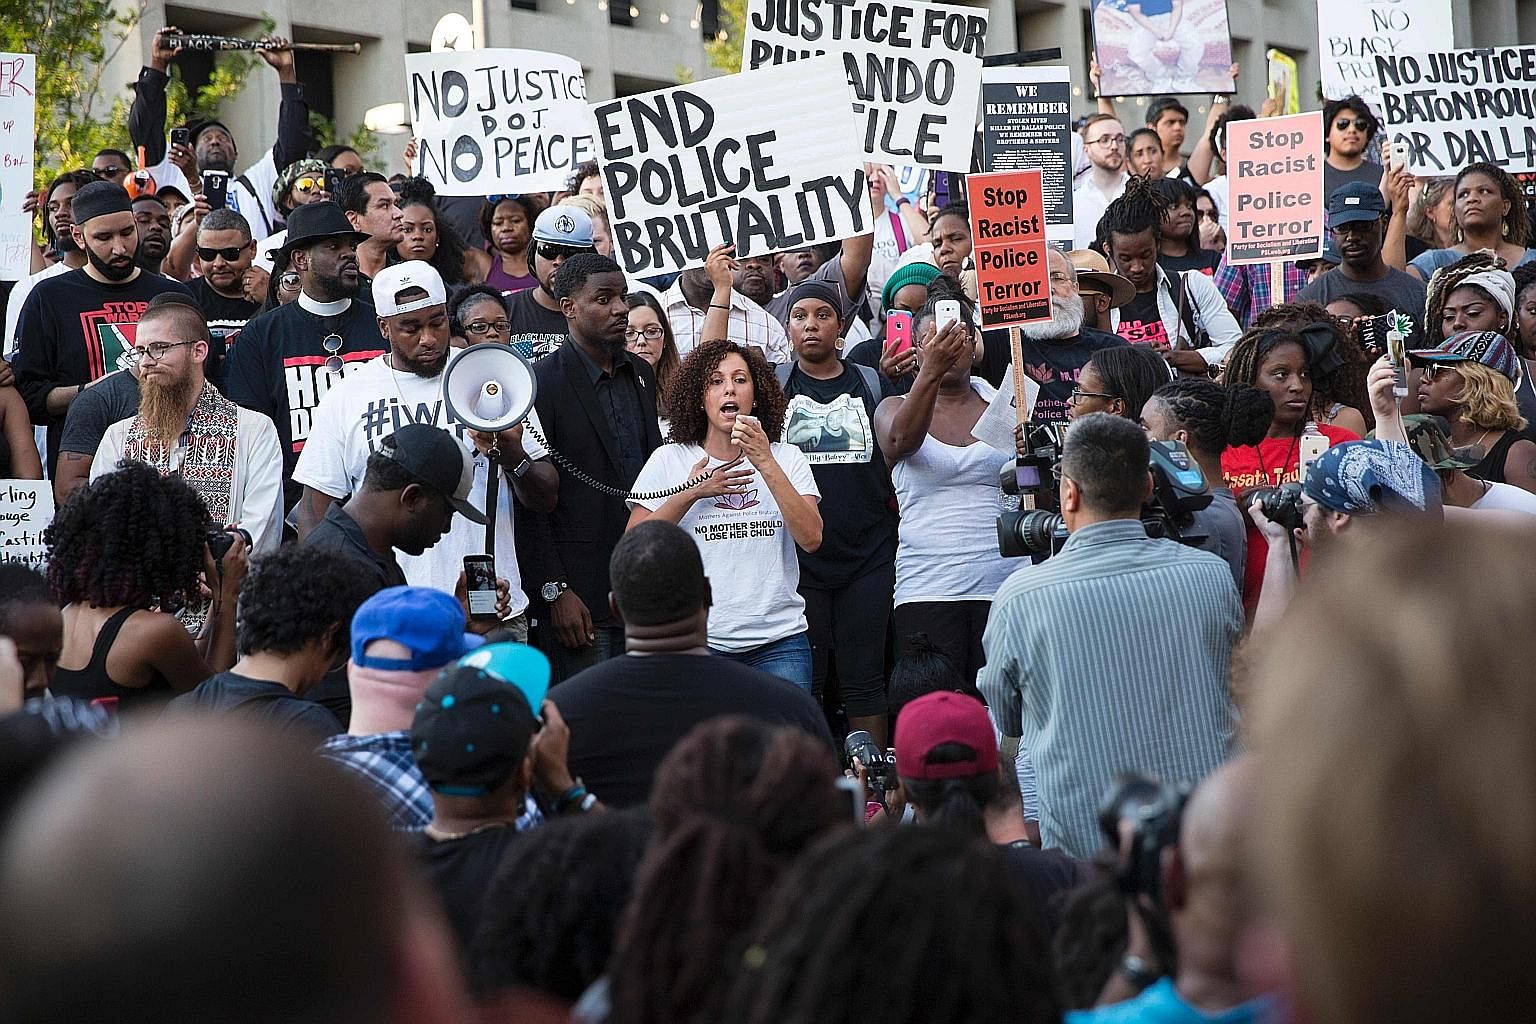 Information posted on social media has, on occasion, spurred public protests against perceived injustices. This was the case in Dallas earlier this month.